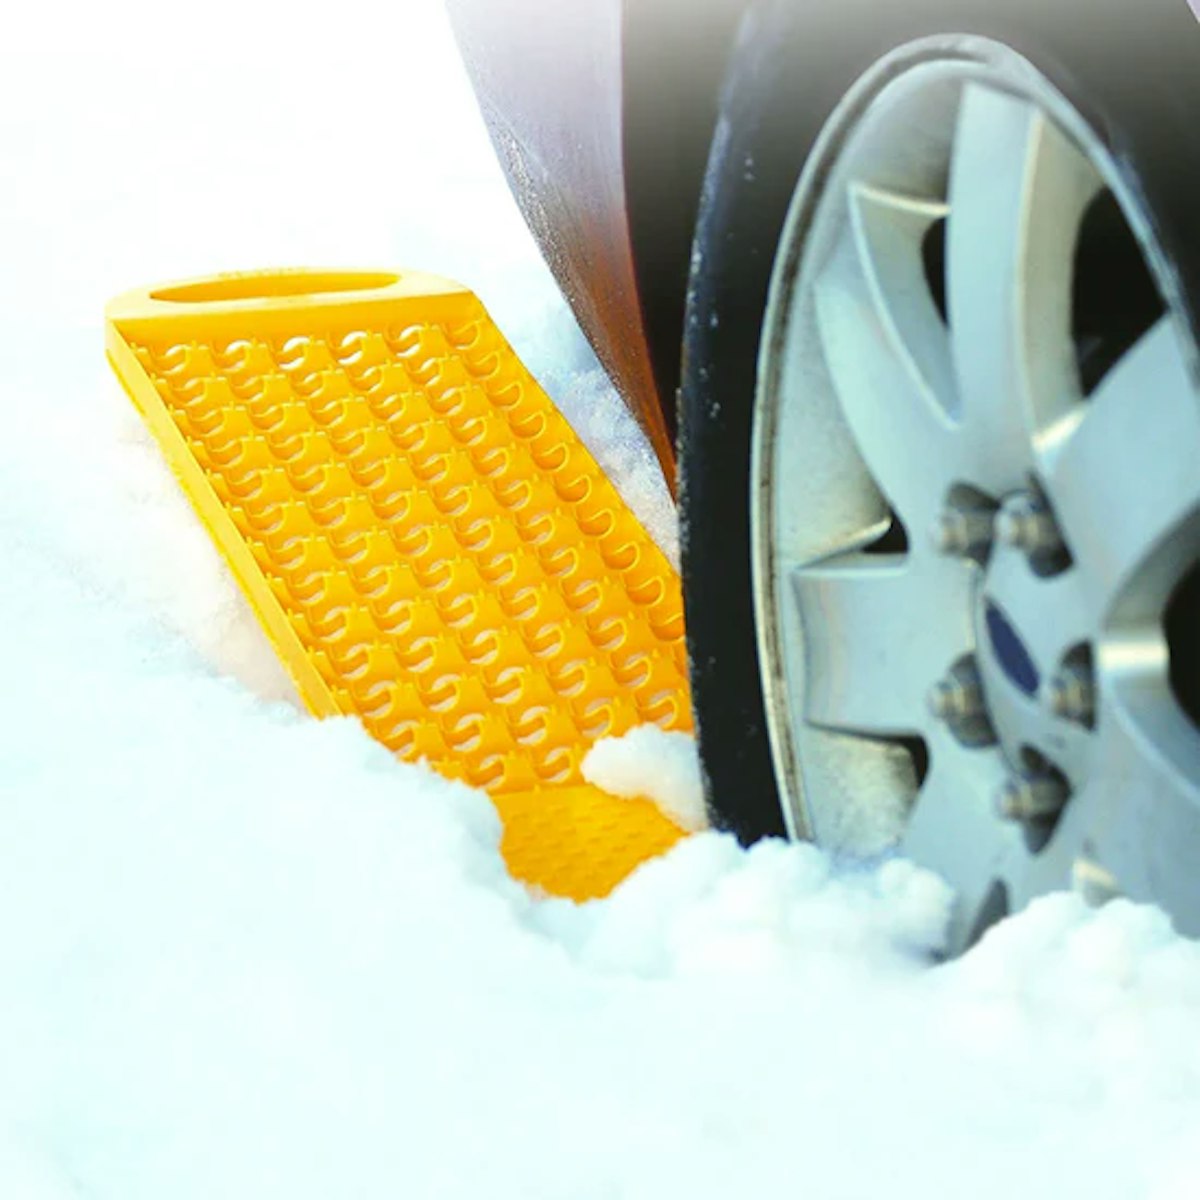 A yellow snow shovel next to a car in the snow.